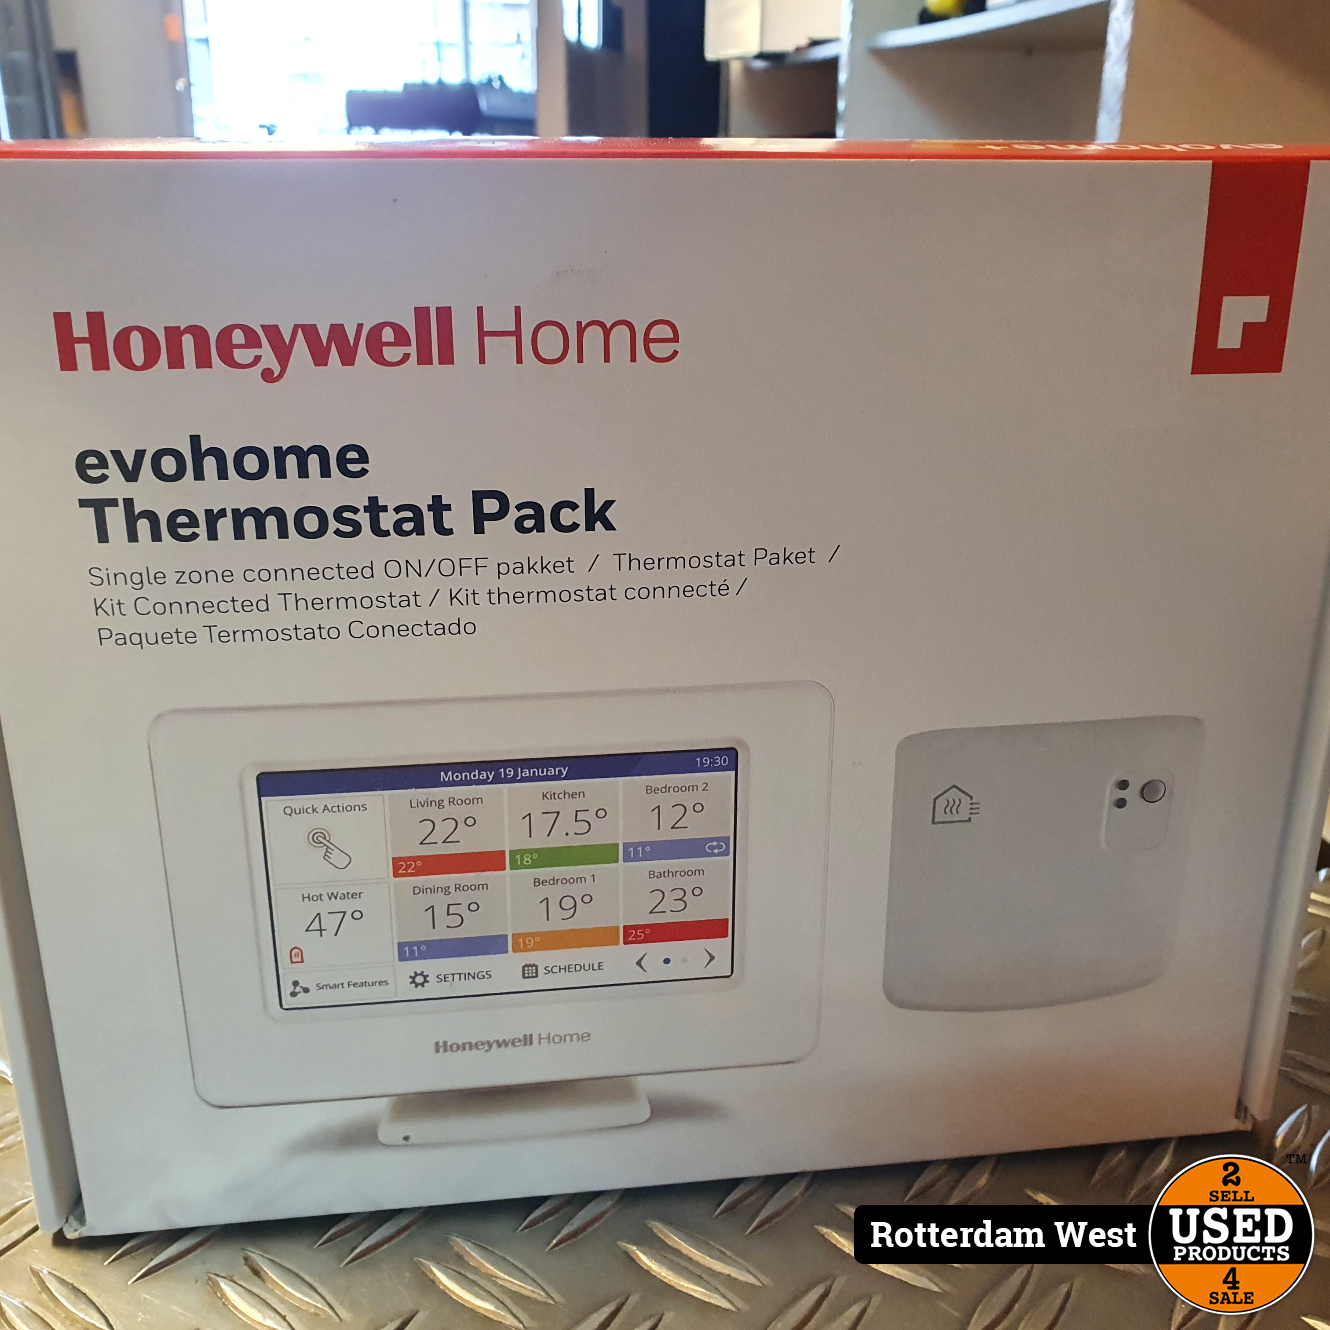 Honeywell evohome slimme thermostaat // NEW - Used Products Rotterdam